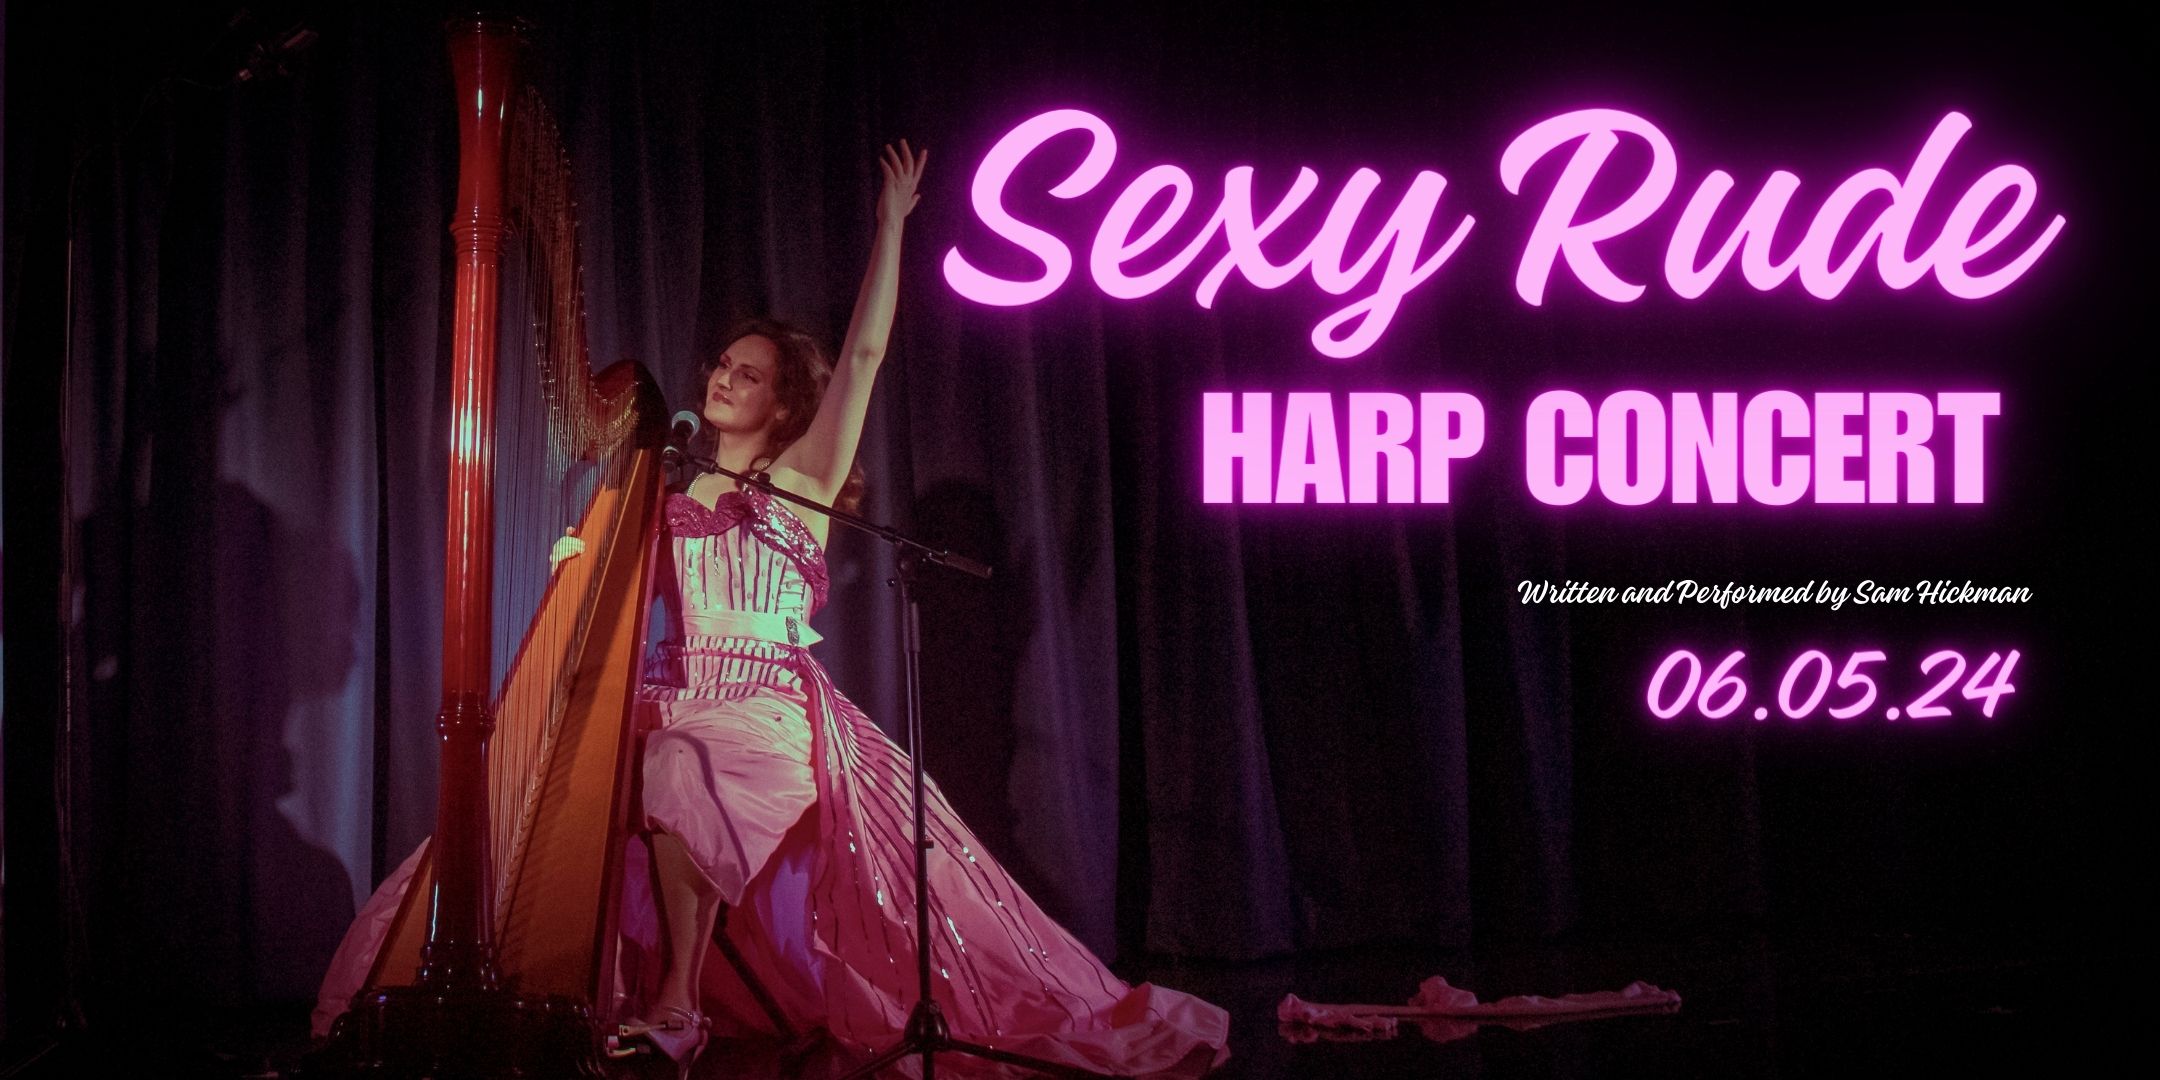 6th May- Sexy Rude Harp Concert